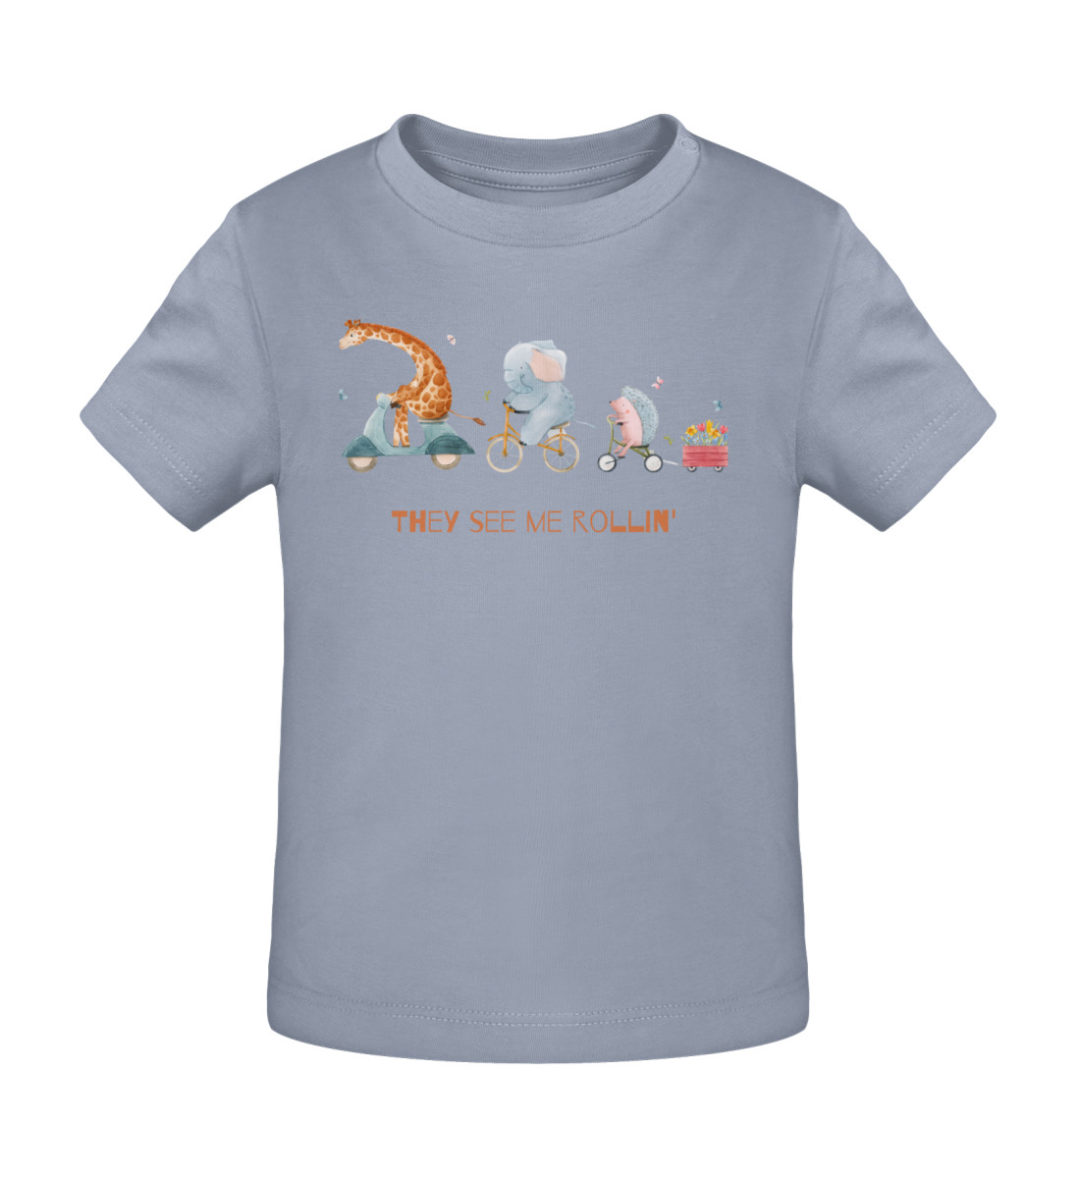 They see me rollin- - Baby Creator T-Shirt ST/ST-7086